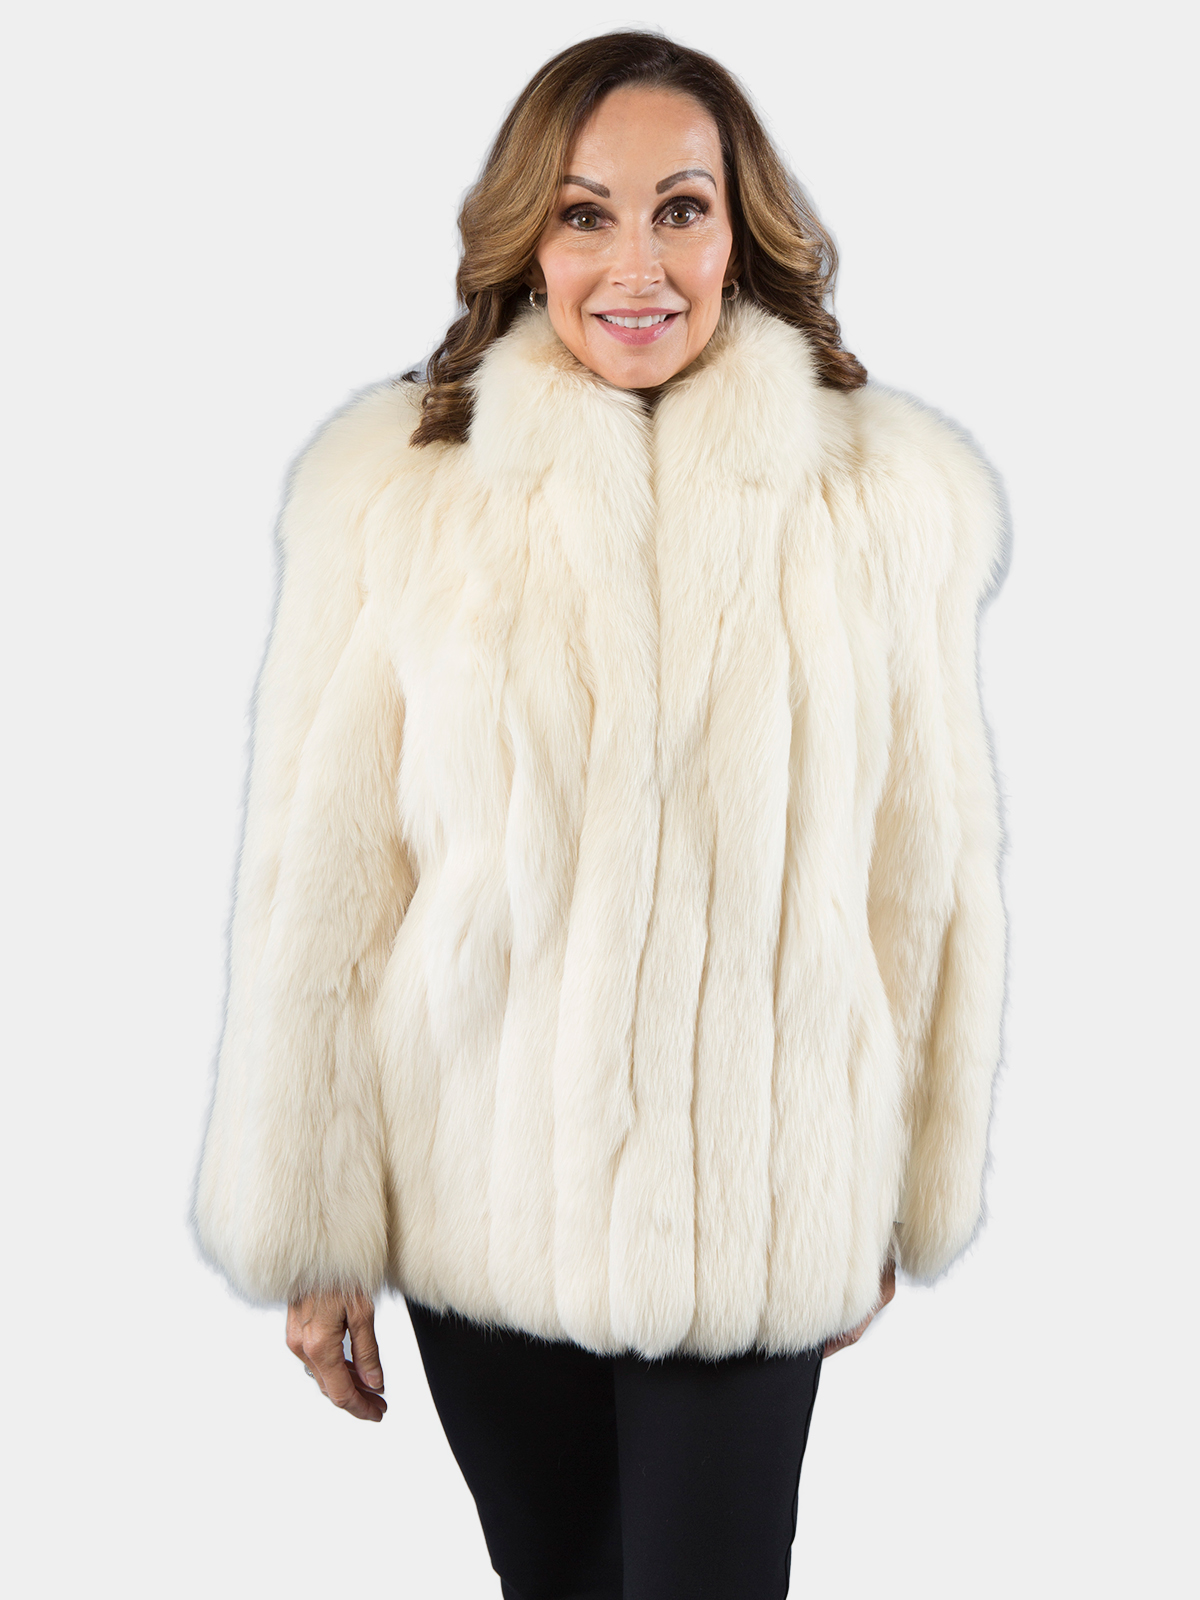 Buy Cardigo Faux Fur Coats for Women Faux Fur Ostrich Feather Soft Coat  Fluffy Winter Jacket White at Amazon.in